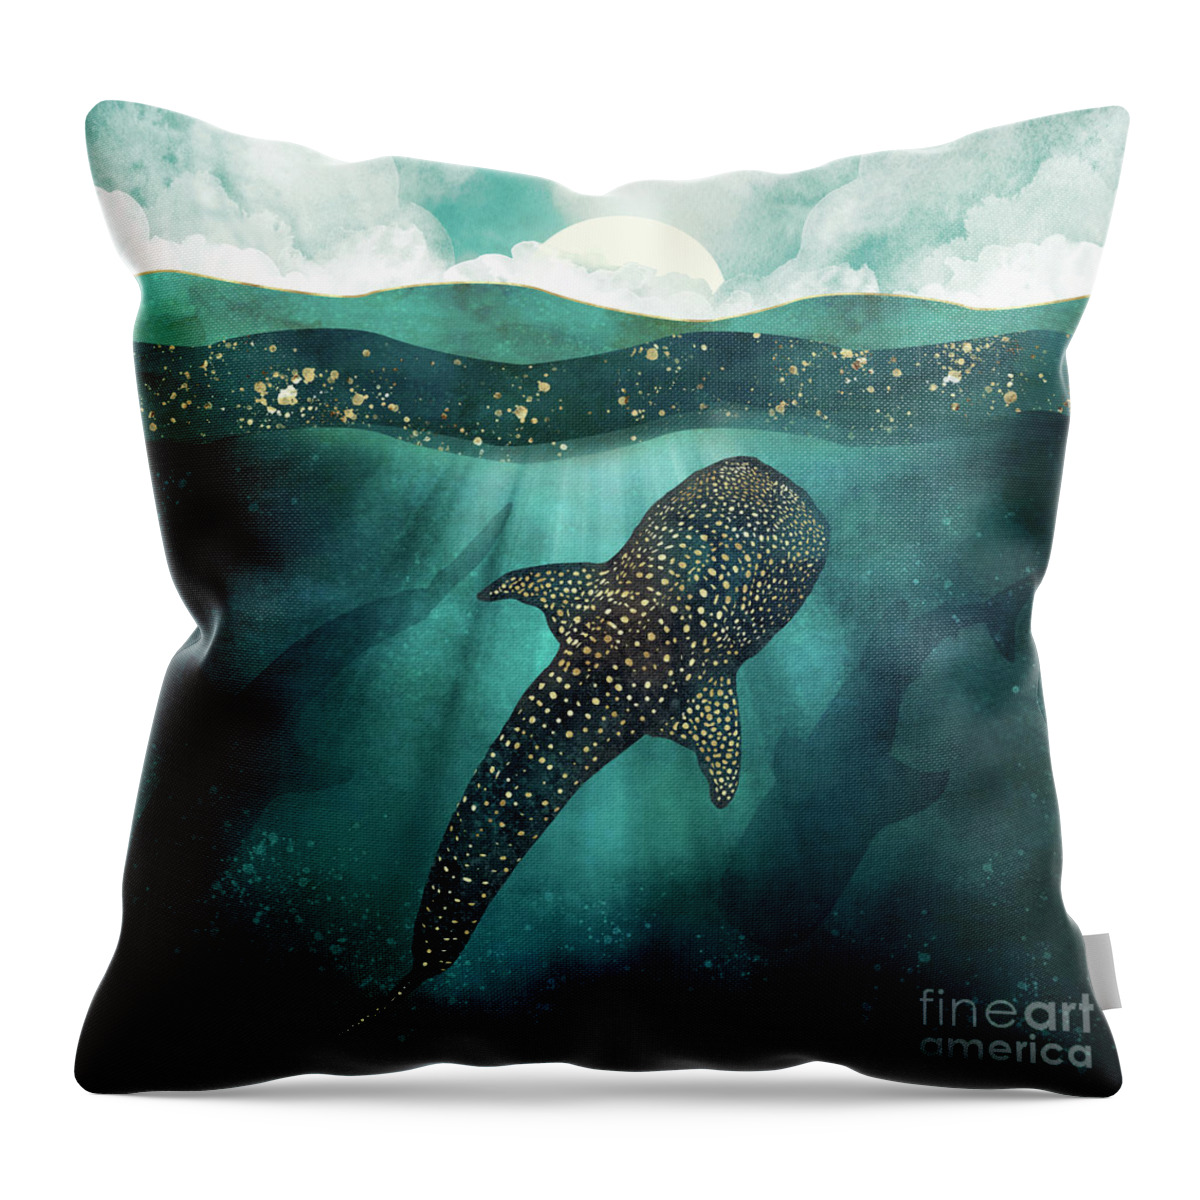 Metallic Throw Pillow featuring the digital art Metallic Whale Shark by Spacefrog Designs